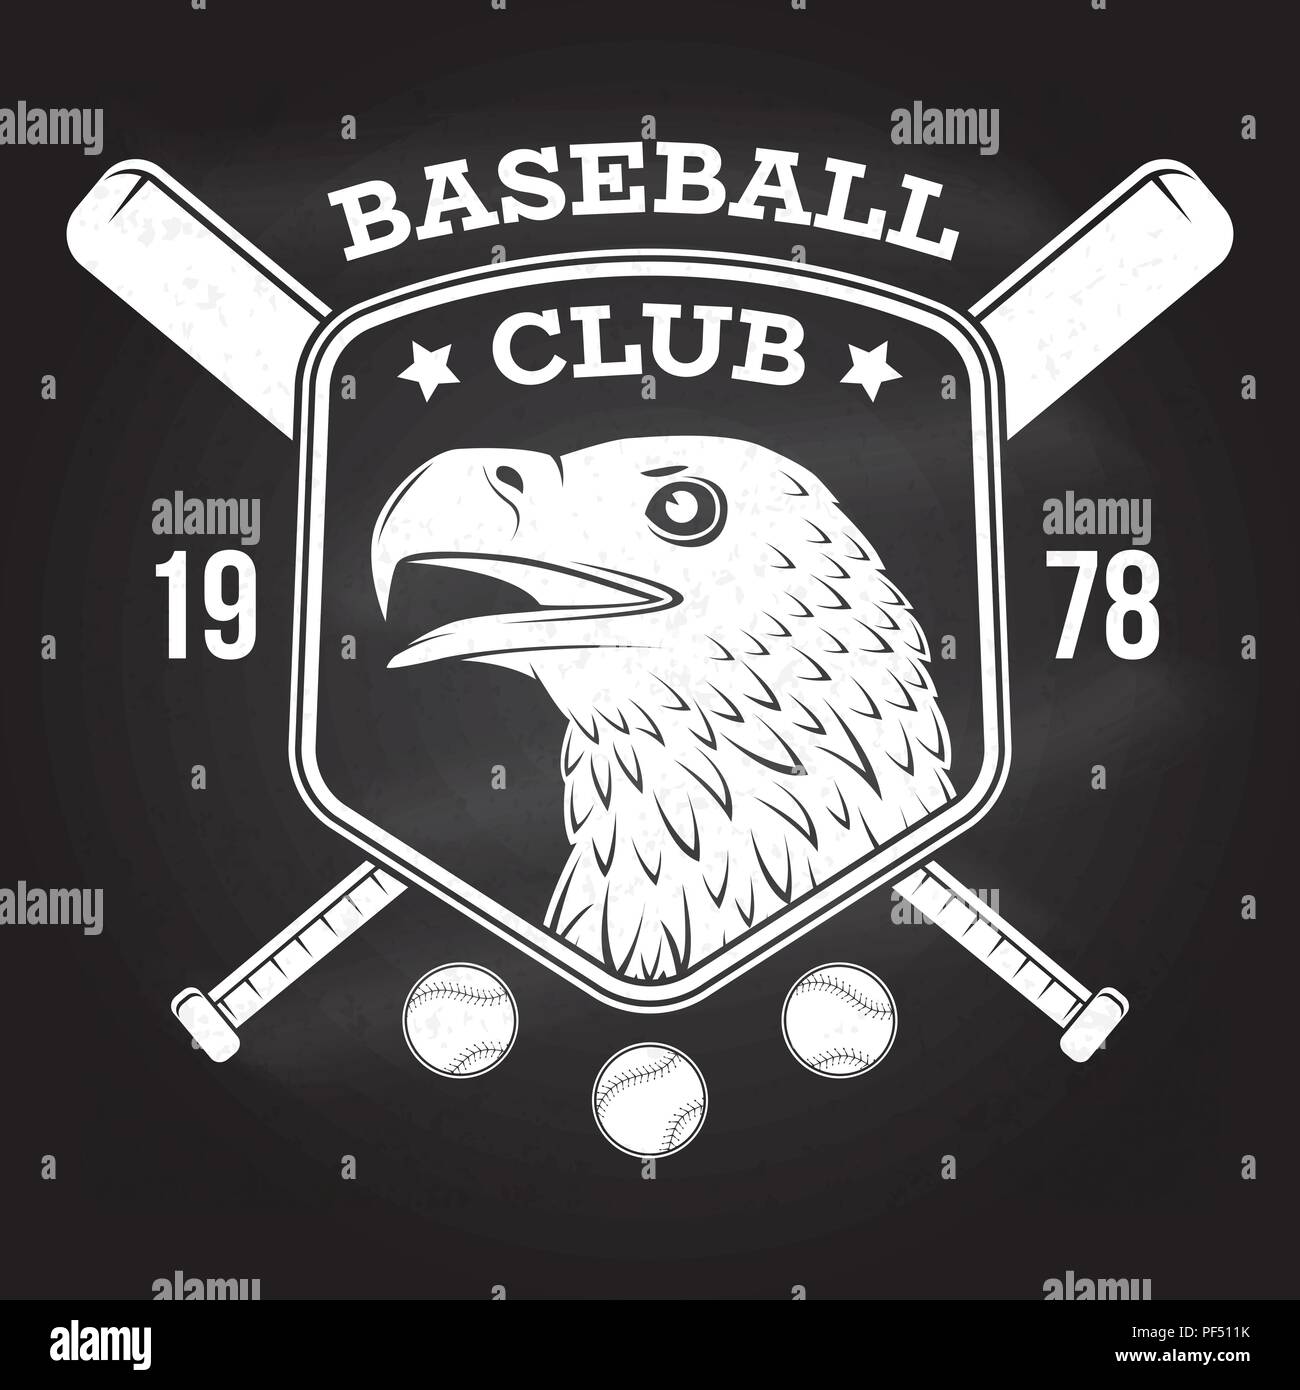 Baseball club badge on the chalkboard. Vector illustration. Concept for shirt or logo, print, stamp or tee. Vintage typography design with baseball bats, eagle and ball for baseball silhouette. Stock Vector